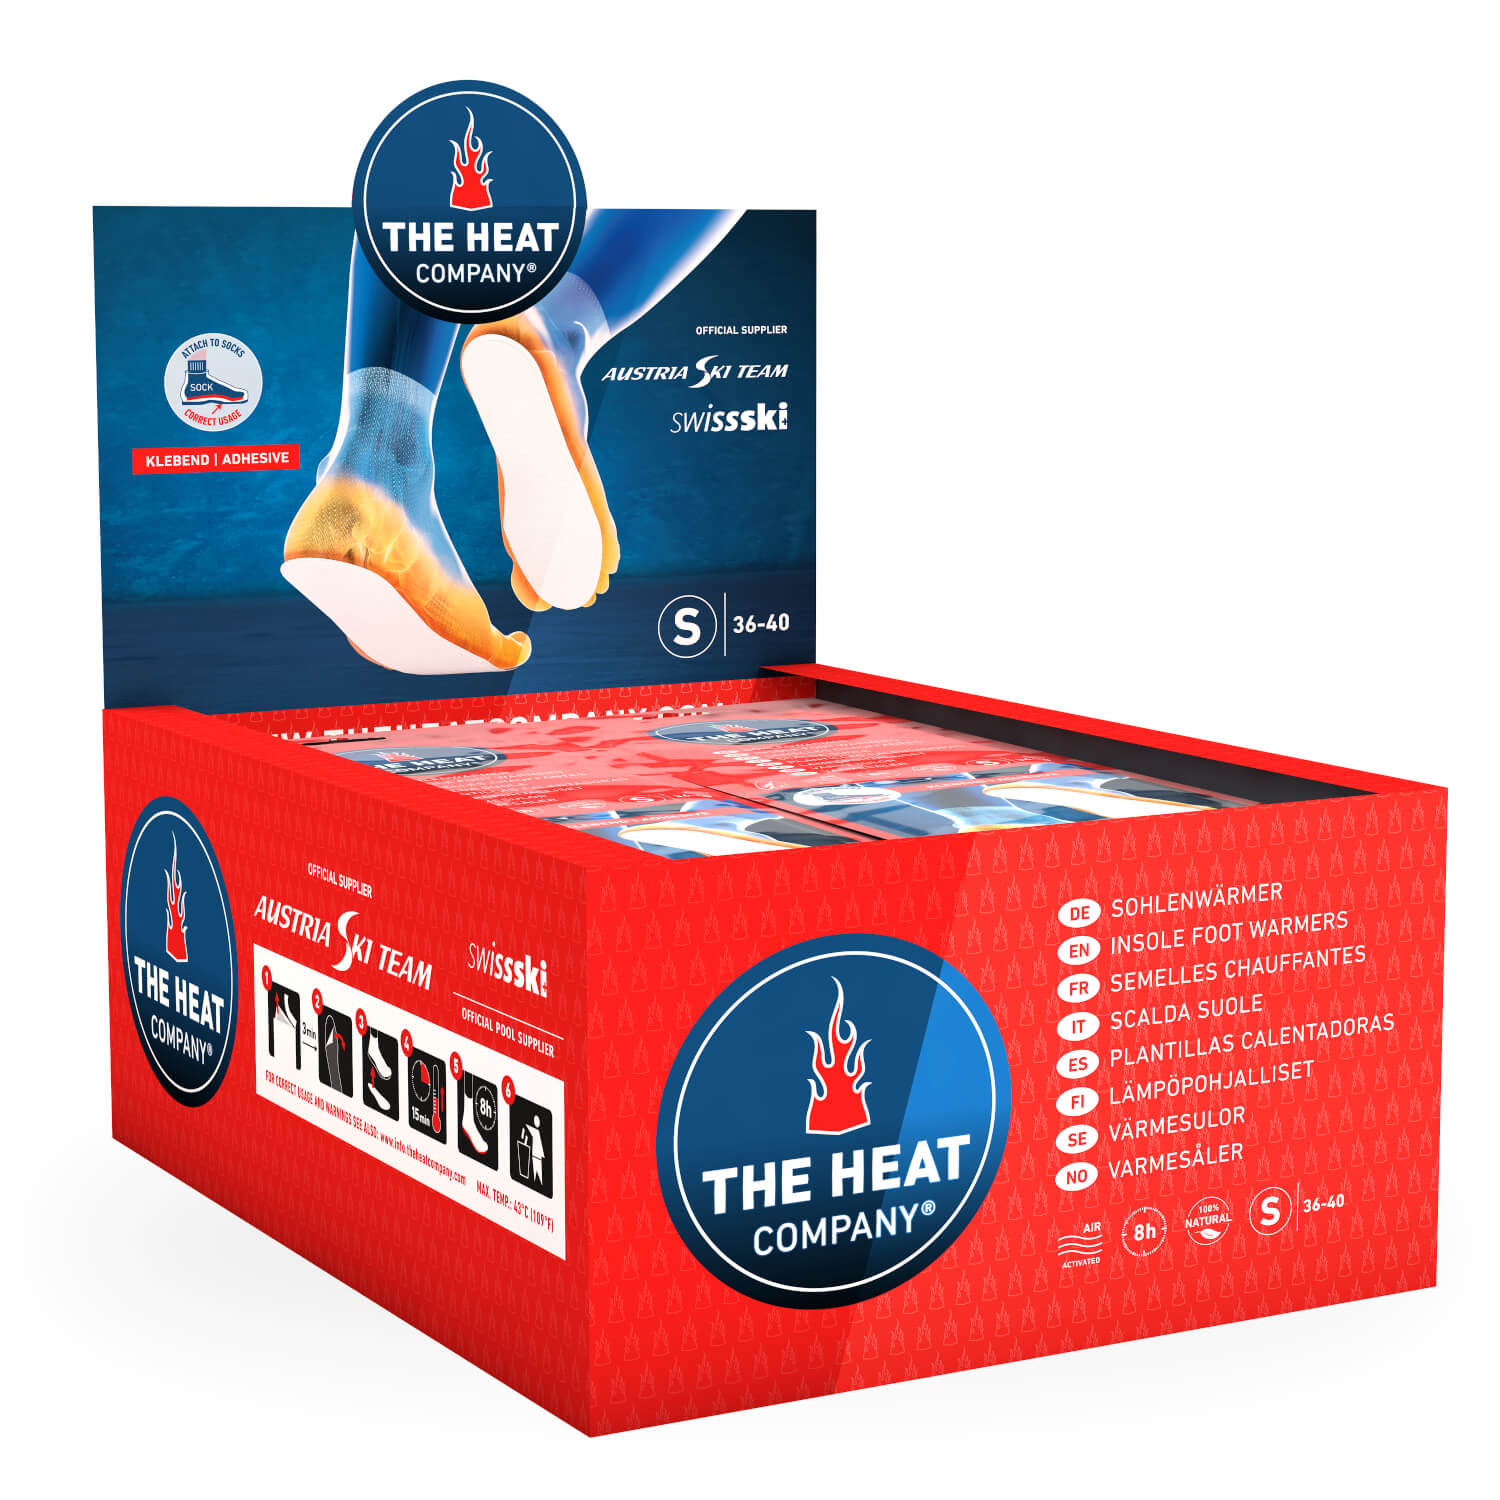 THE HEAT COMPANY Insole Foot Warmers Adhesive EXTRA WARM 30 Pairs Adhesive 